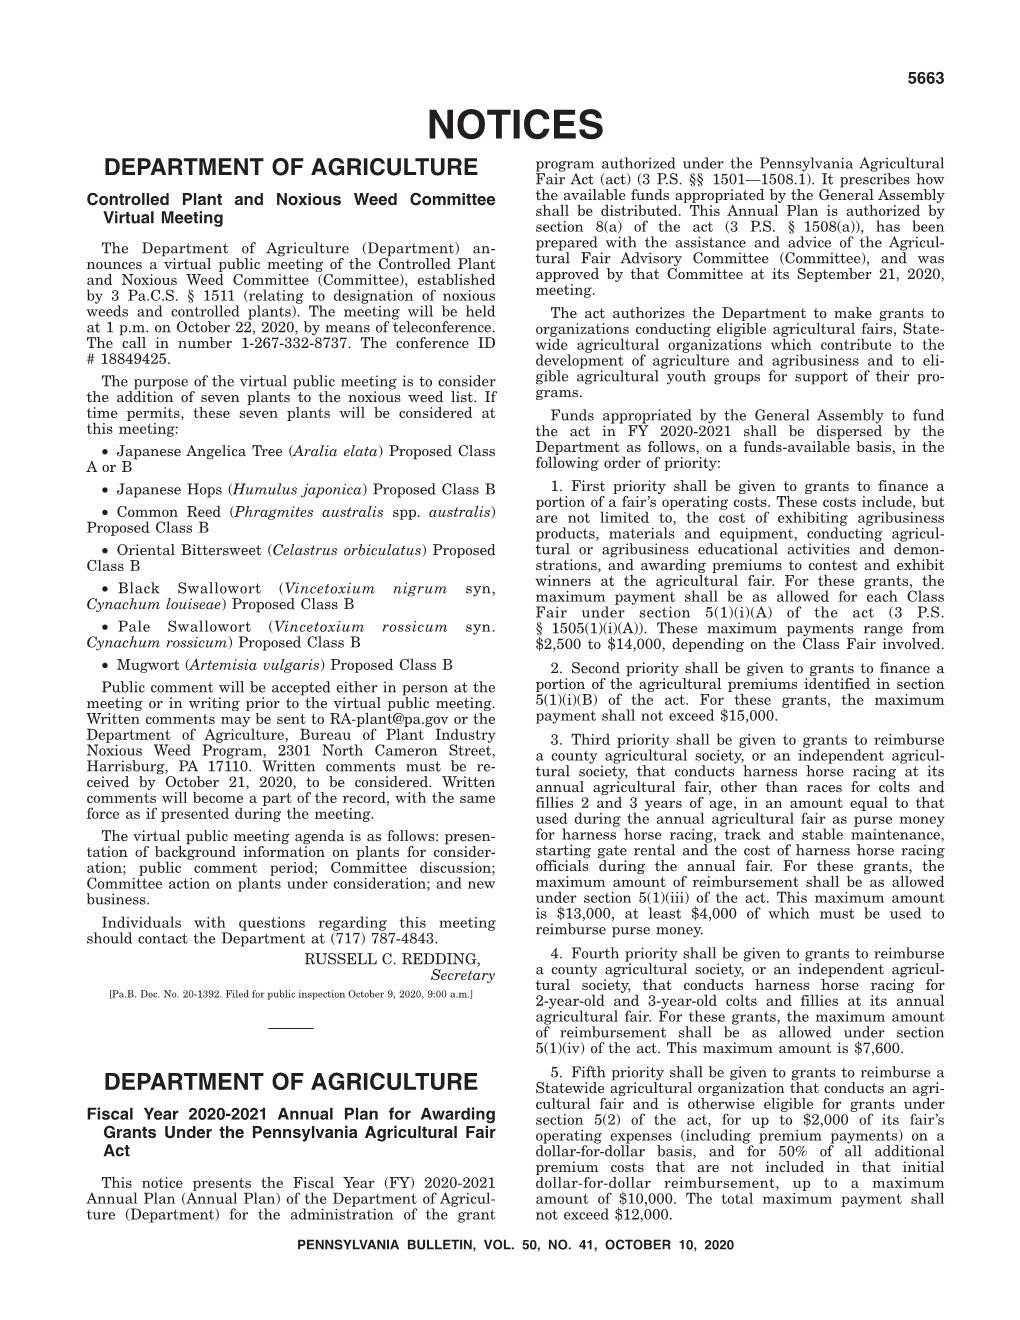 NOTICES Program Authorized Under the Pennsylvania Agricultural DEPARTMENT of AGRICULTURE Fair Act (Act) (3 P.S